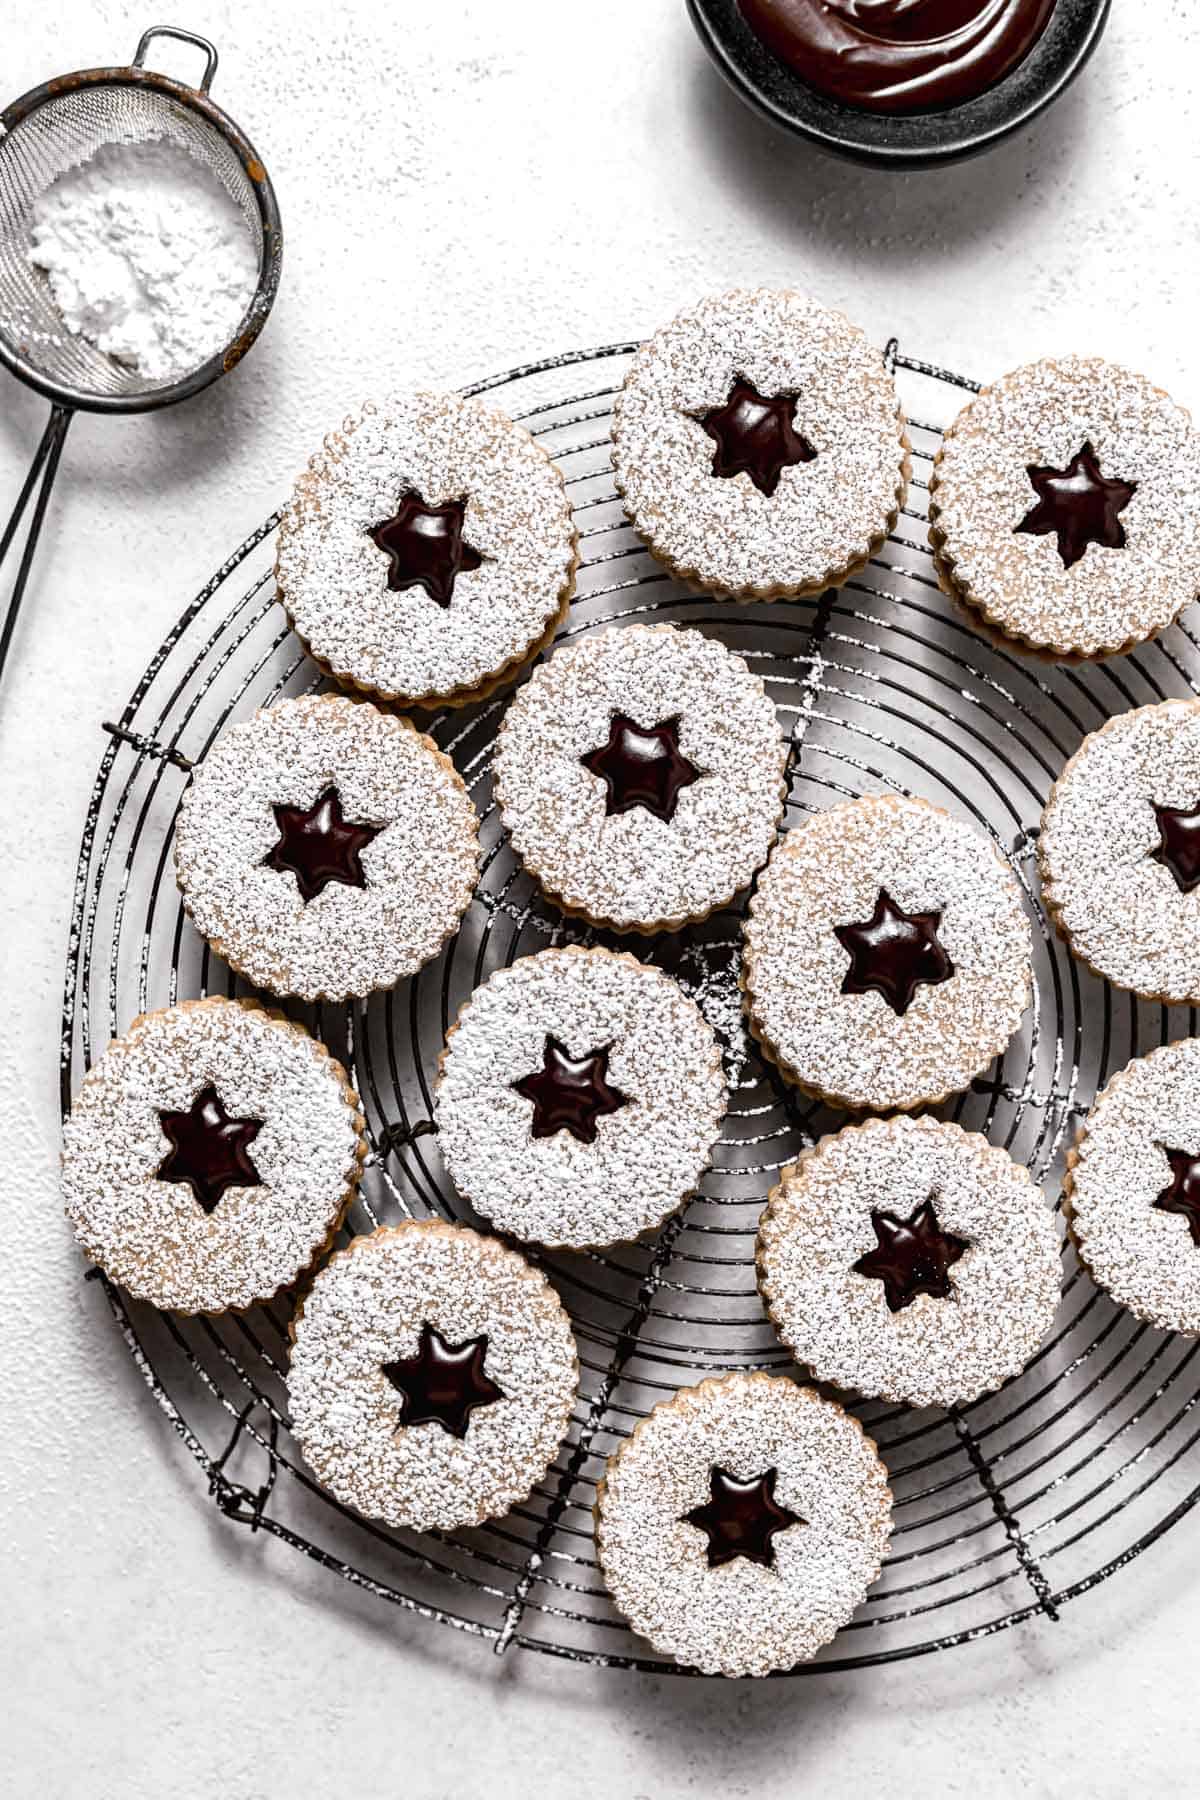 assembled linzer cookies on wire rack.